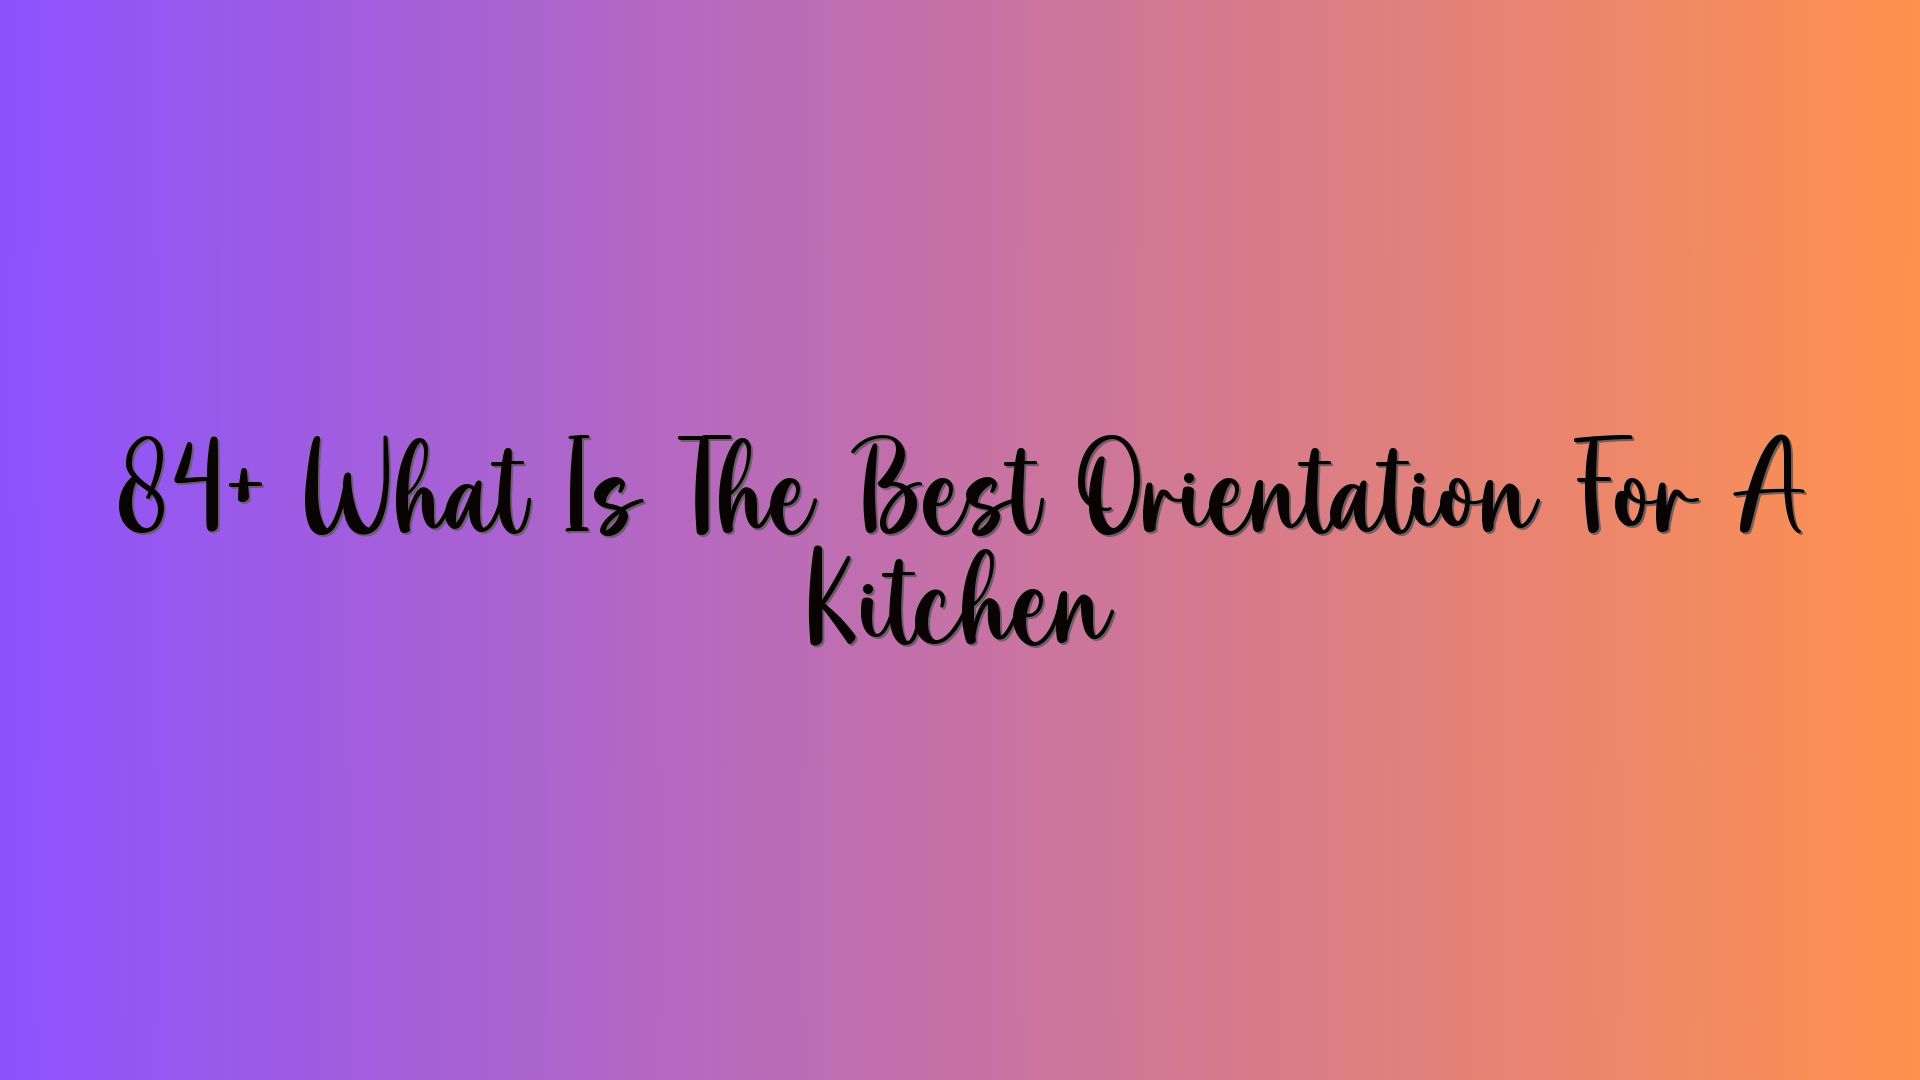 84+ What Is The Best Orientation For A Kitchen